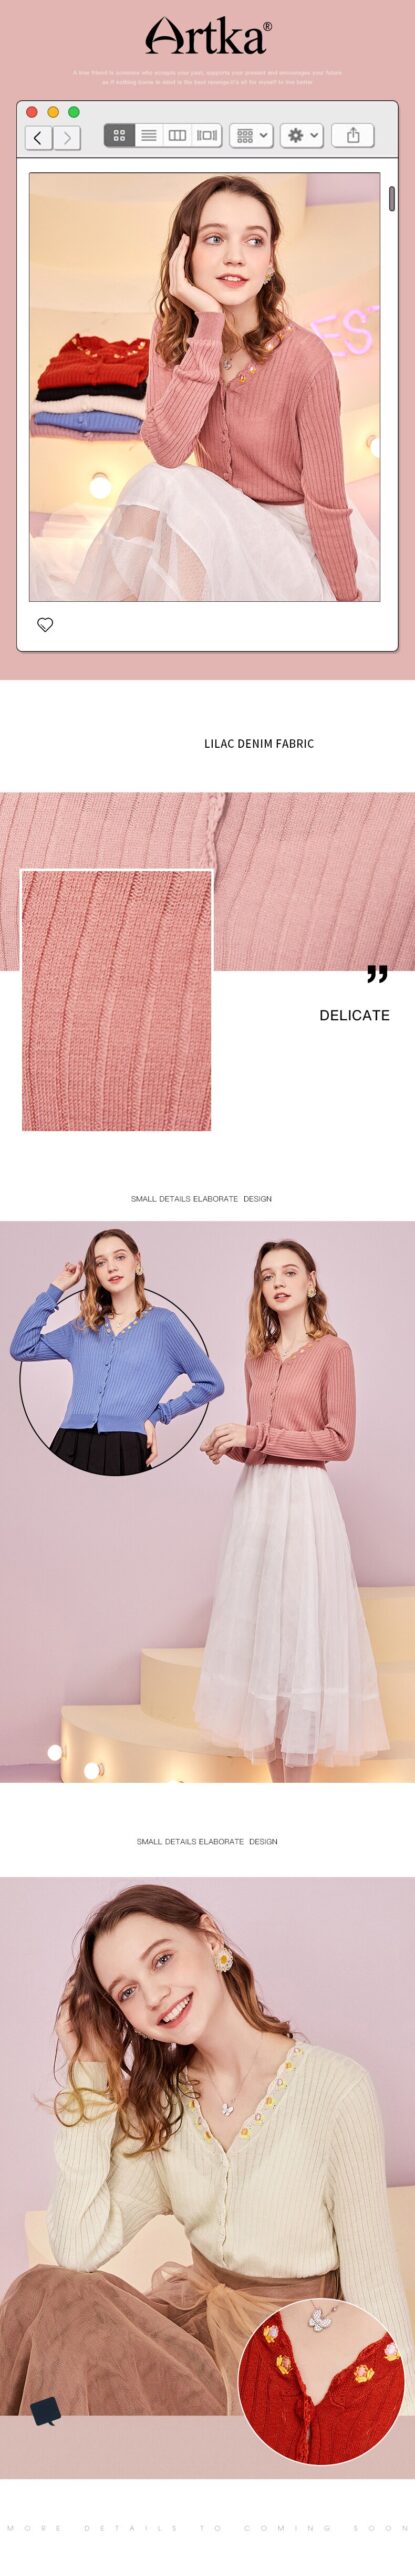 ARTKA 2021 Spring New Women Knitwear 6 Colors Elegant V-Neck Embroidery Sweater Soft Wool Knitted Cardigan Outerwear YB25305Q